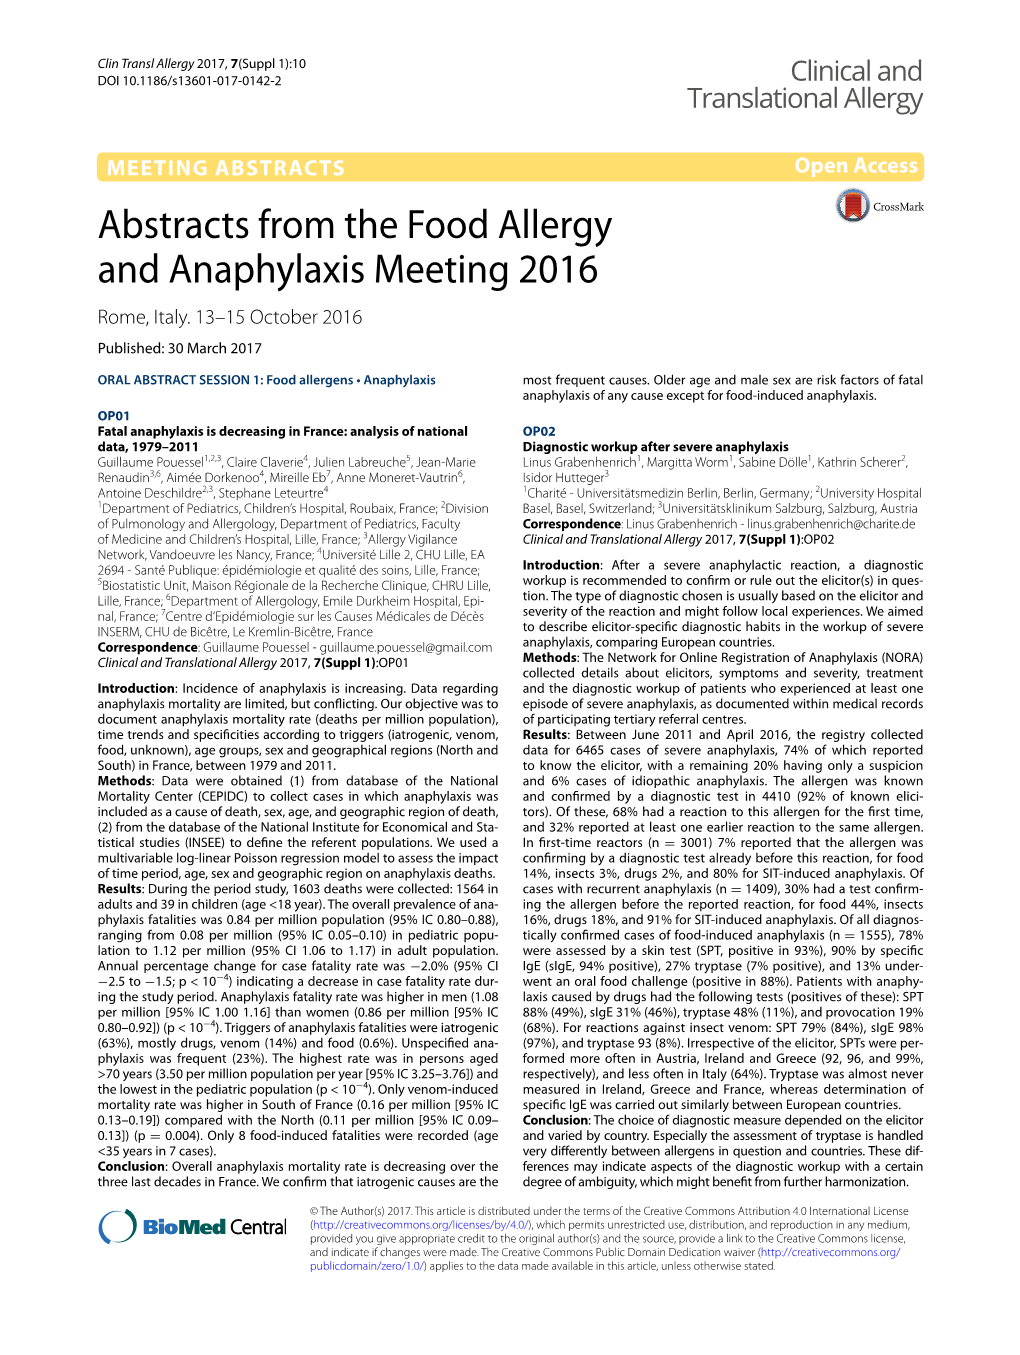 Abstracts from the Food Allergy and Anaphylaxis Meeting 2016 Rome, Italy